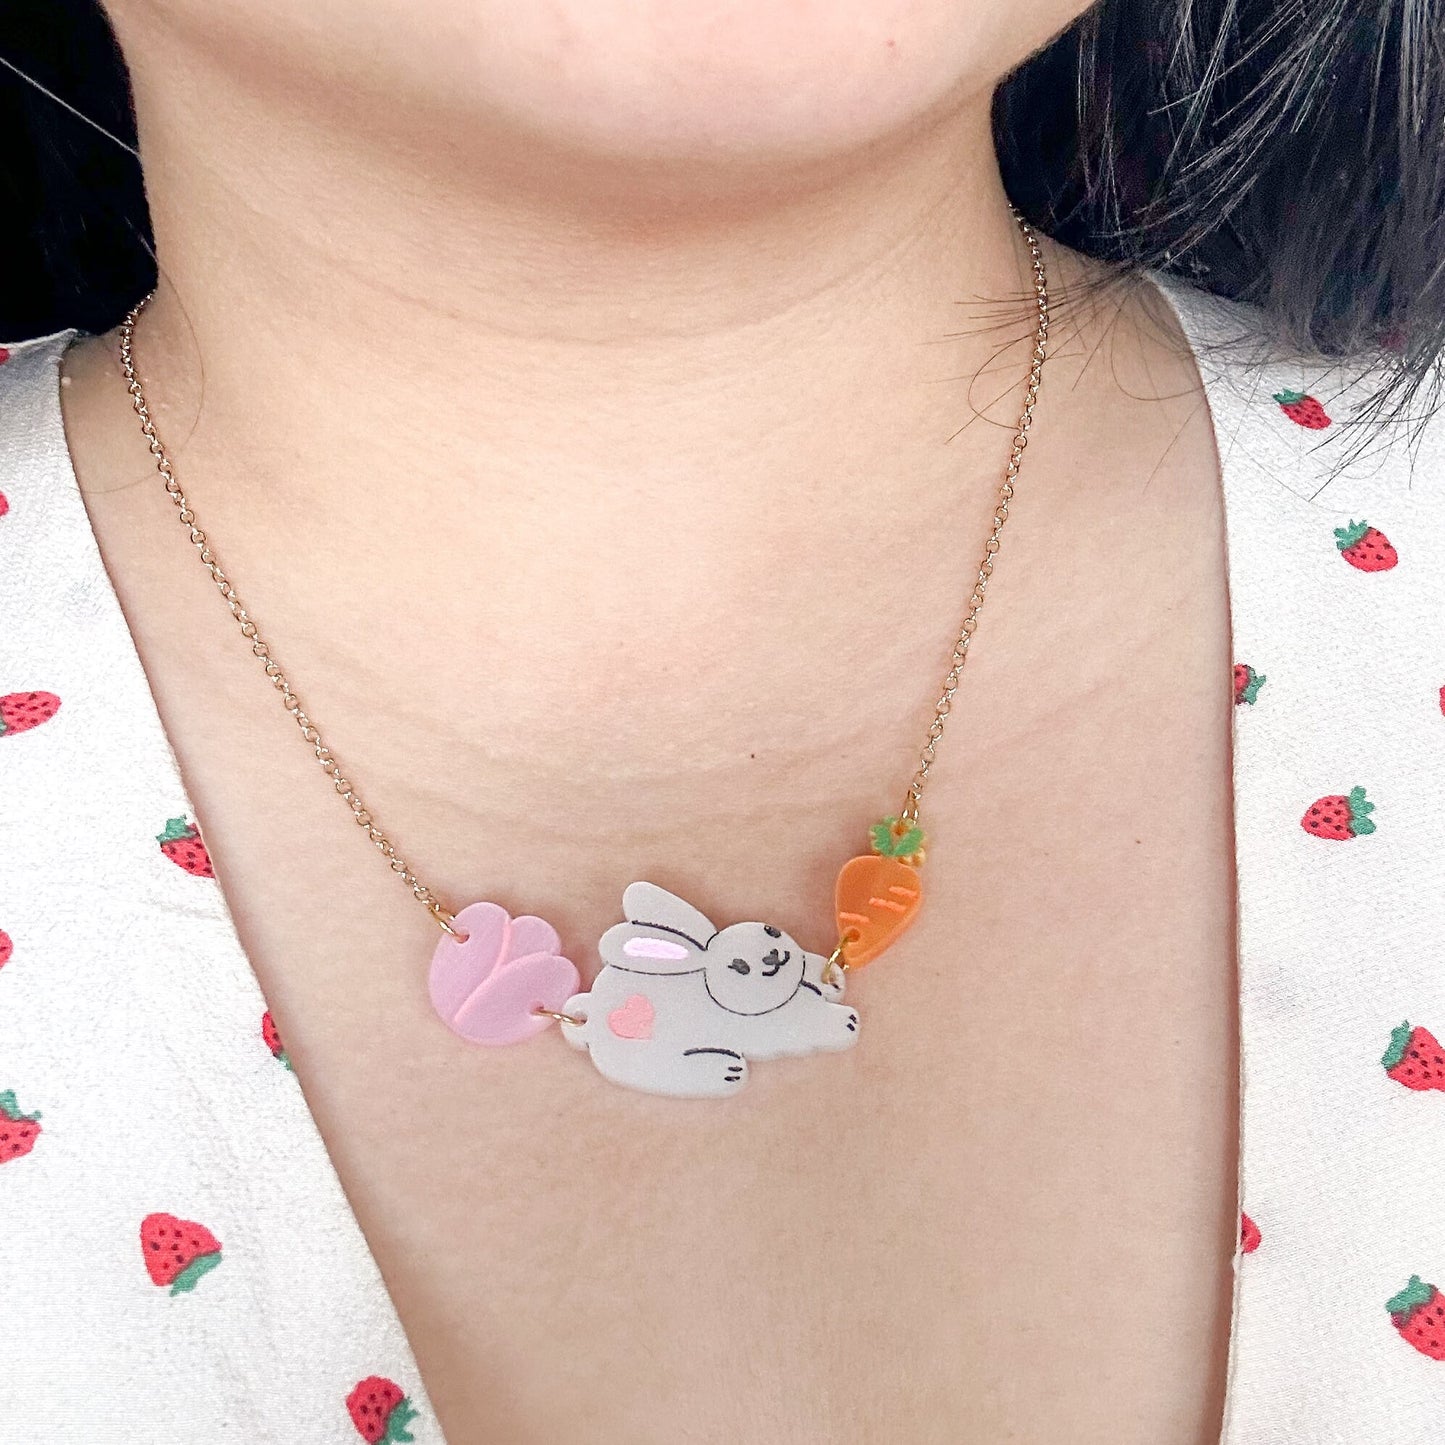 Bunny Necklace//Animal Necklace//Statement Necklace//Acrylic Necklace//Cute Spring Necklace//Animal//Cute Necklace//Gift for Her